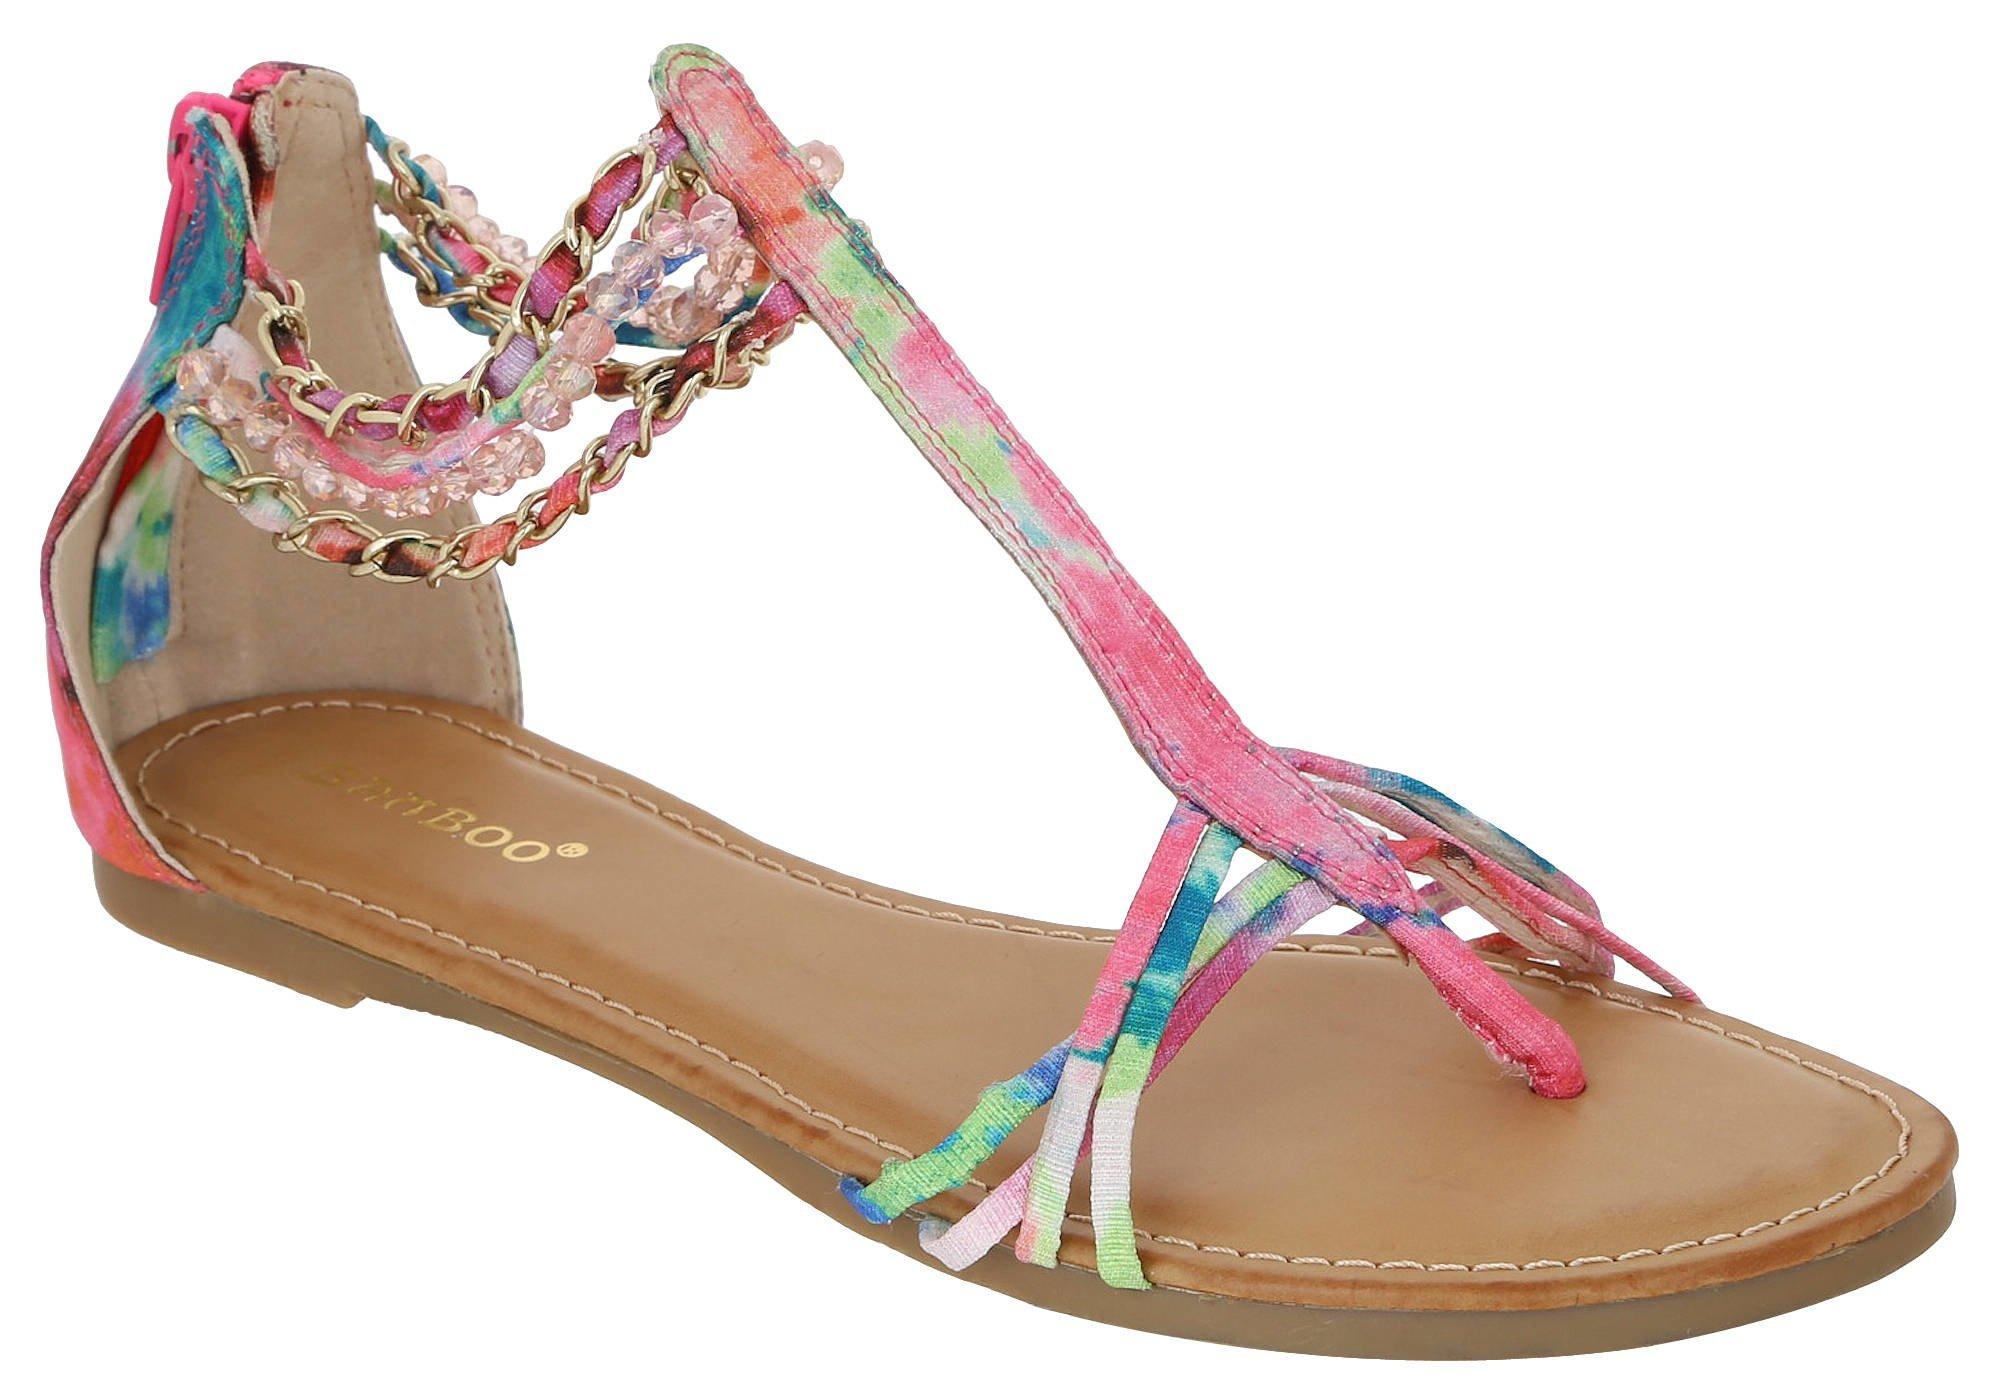 Dino-49 Tropical Sandals - Pink Multi | Burkes Outlet